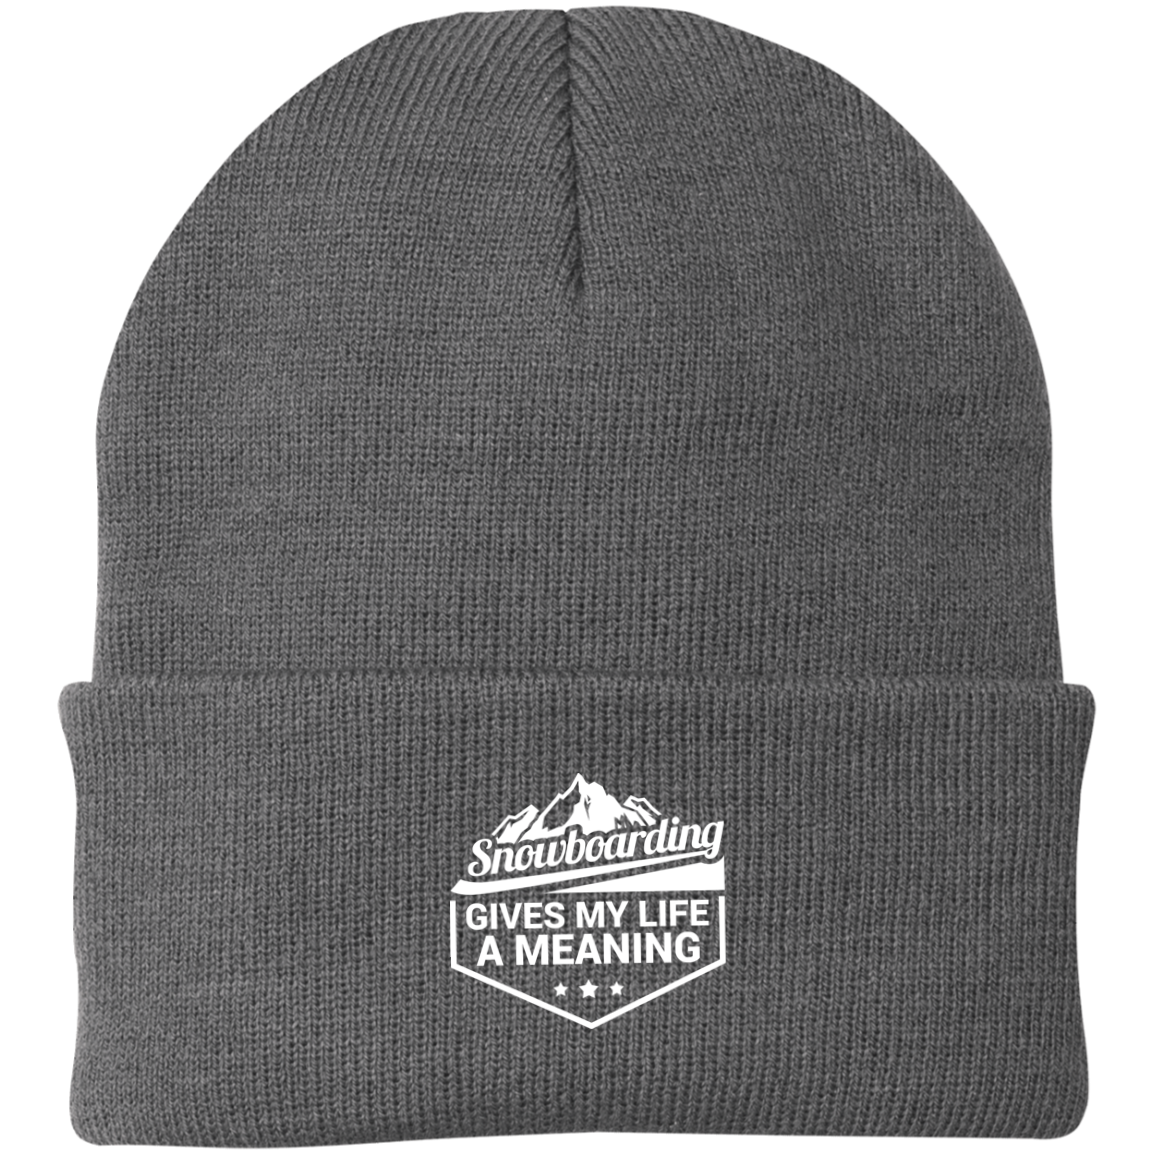 Snowboarding Gives My Life a Meaning Knit Cap - Powderaddicts